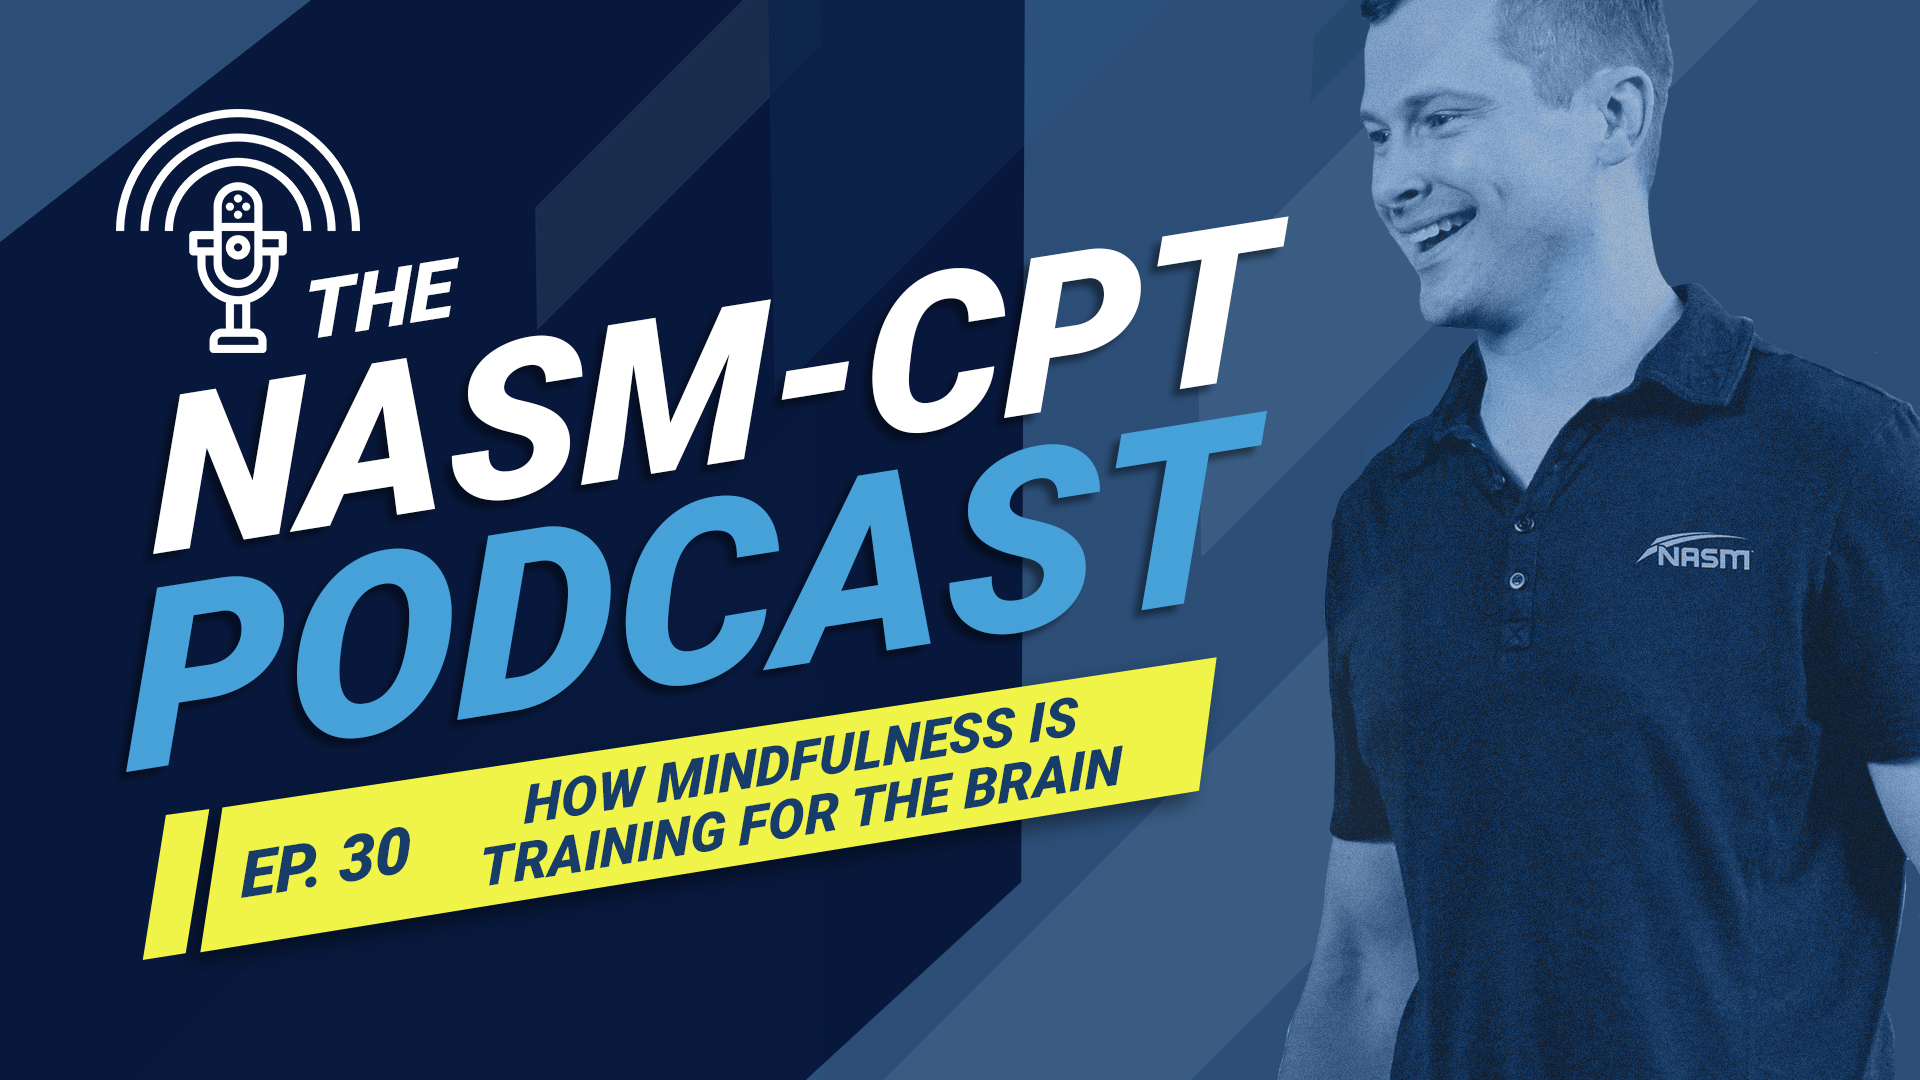 NASM-CPT Podcast Ep. 30